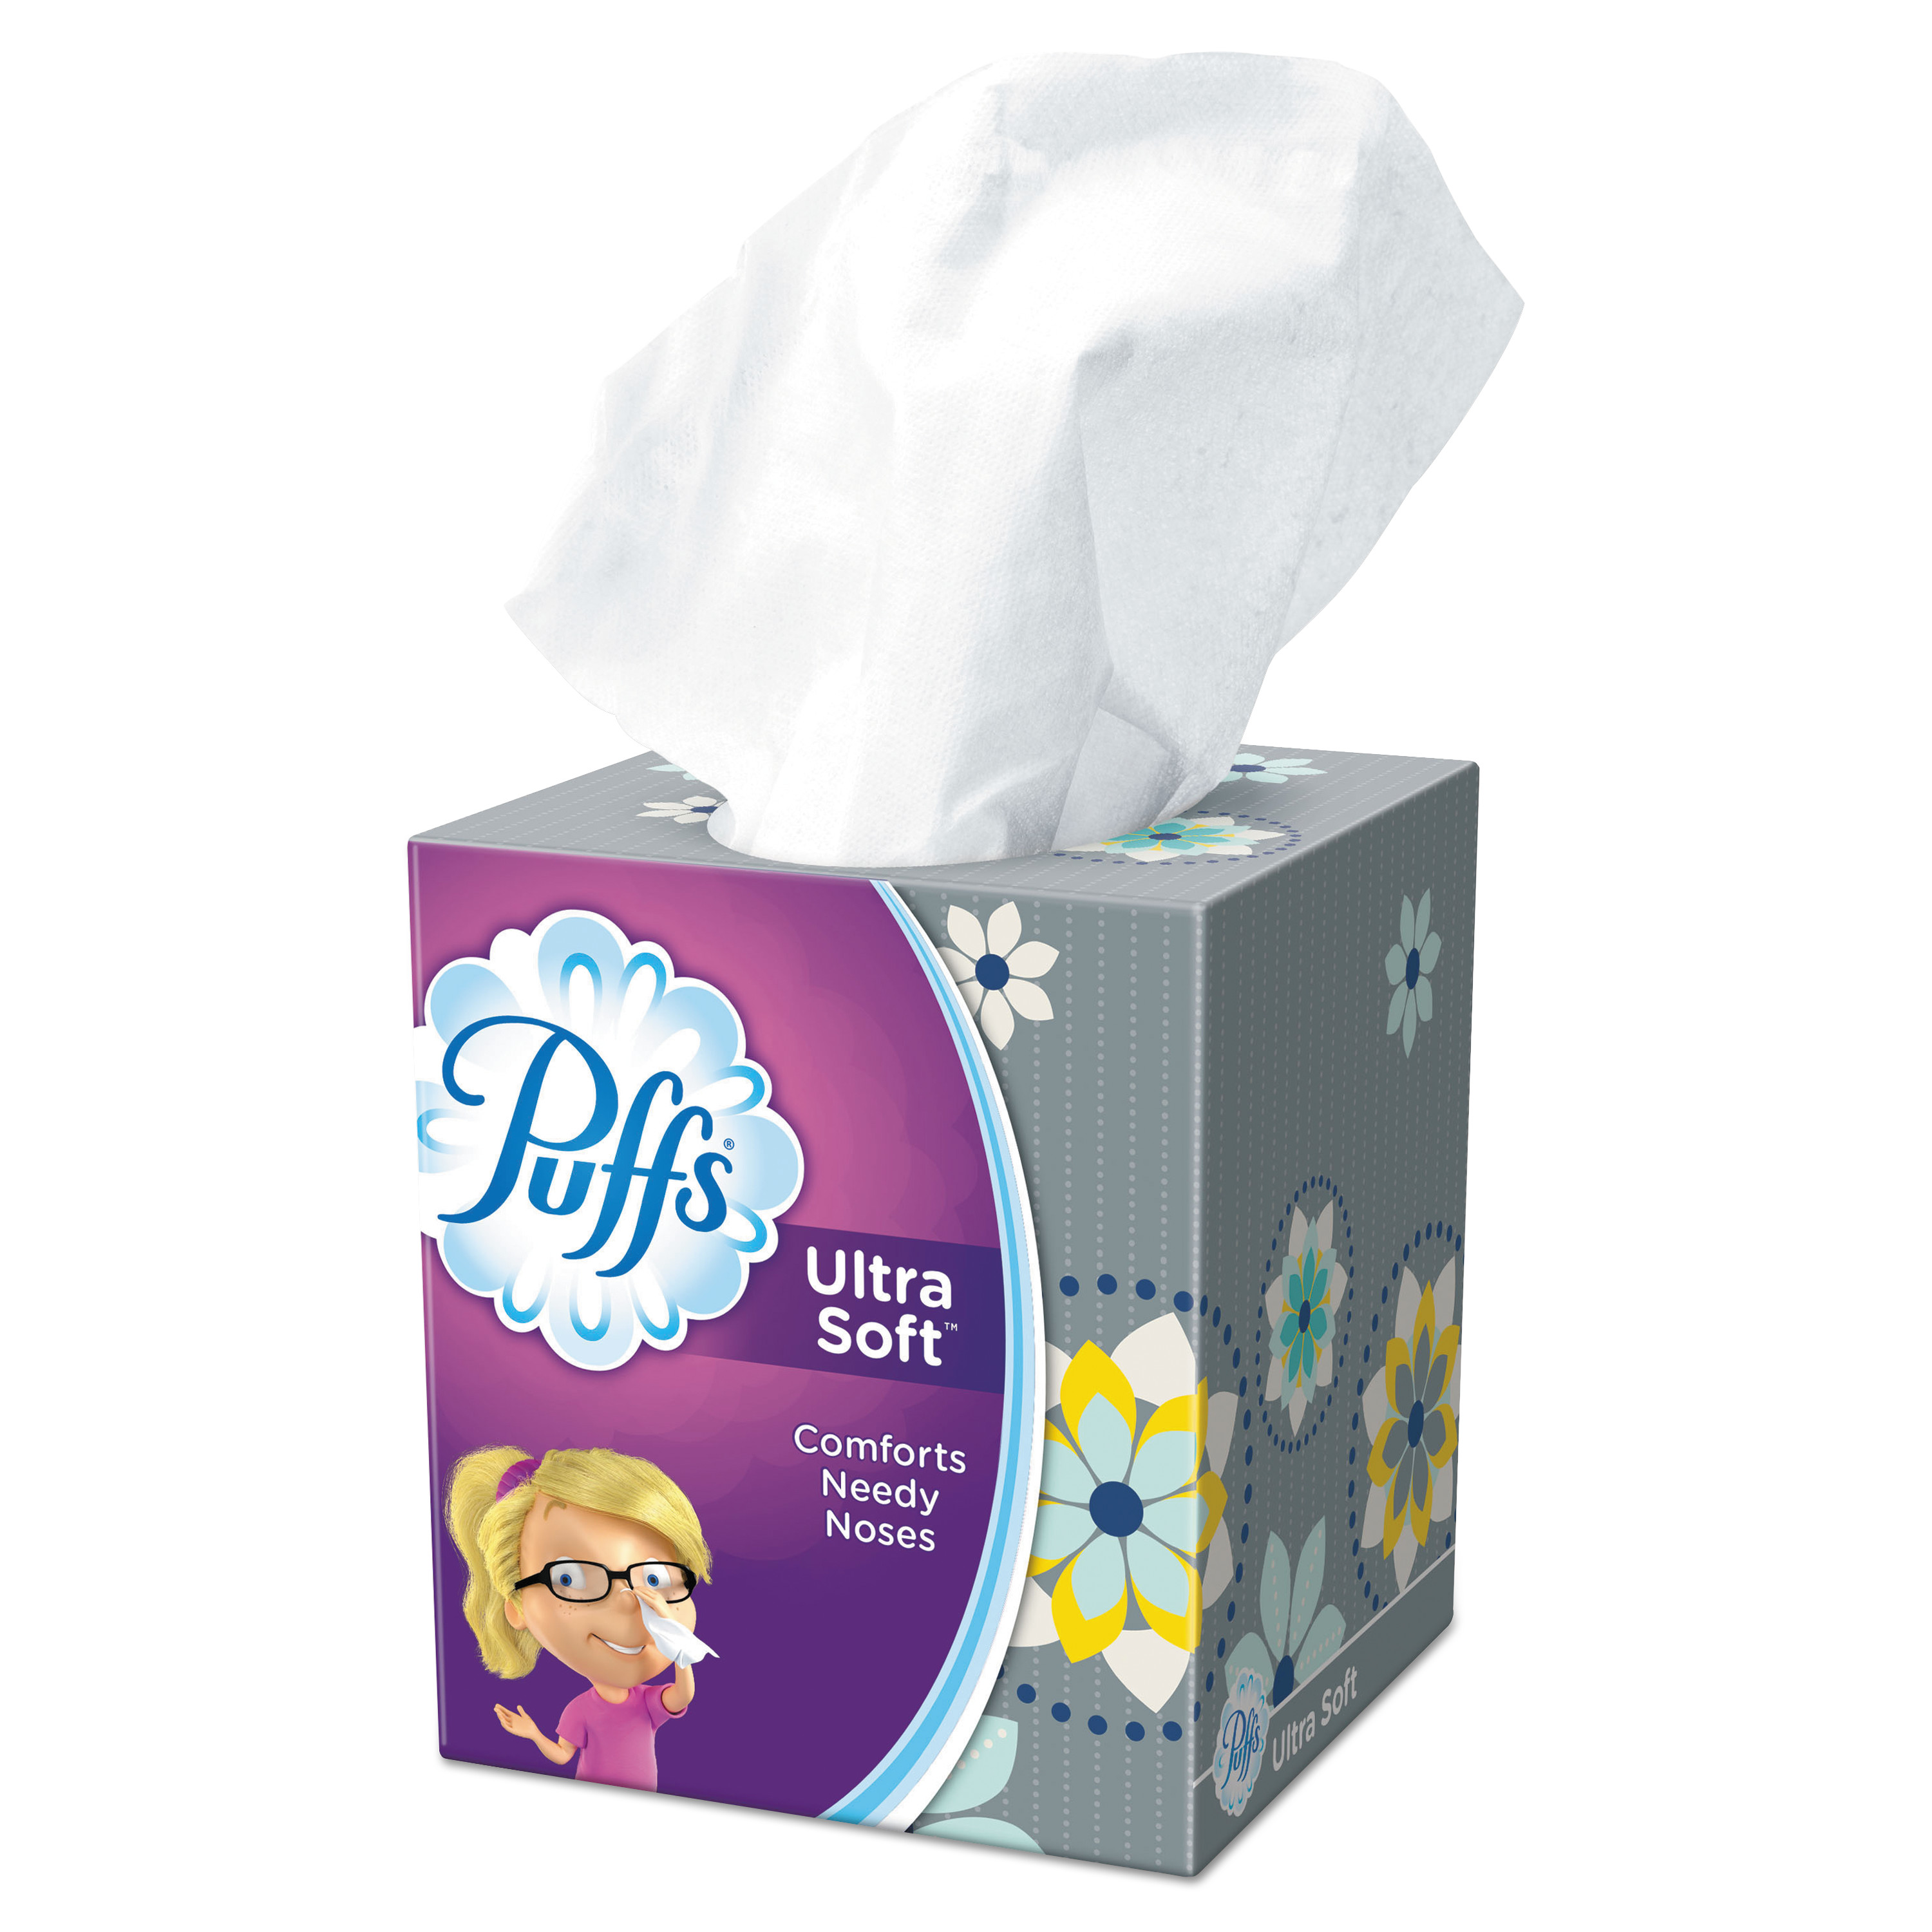 Soothing Lotion™ Facial Tissues Cube Box for Runny Noses